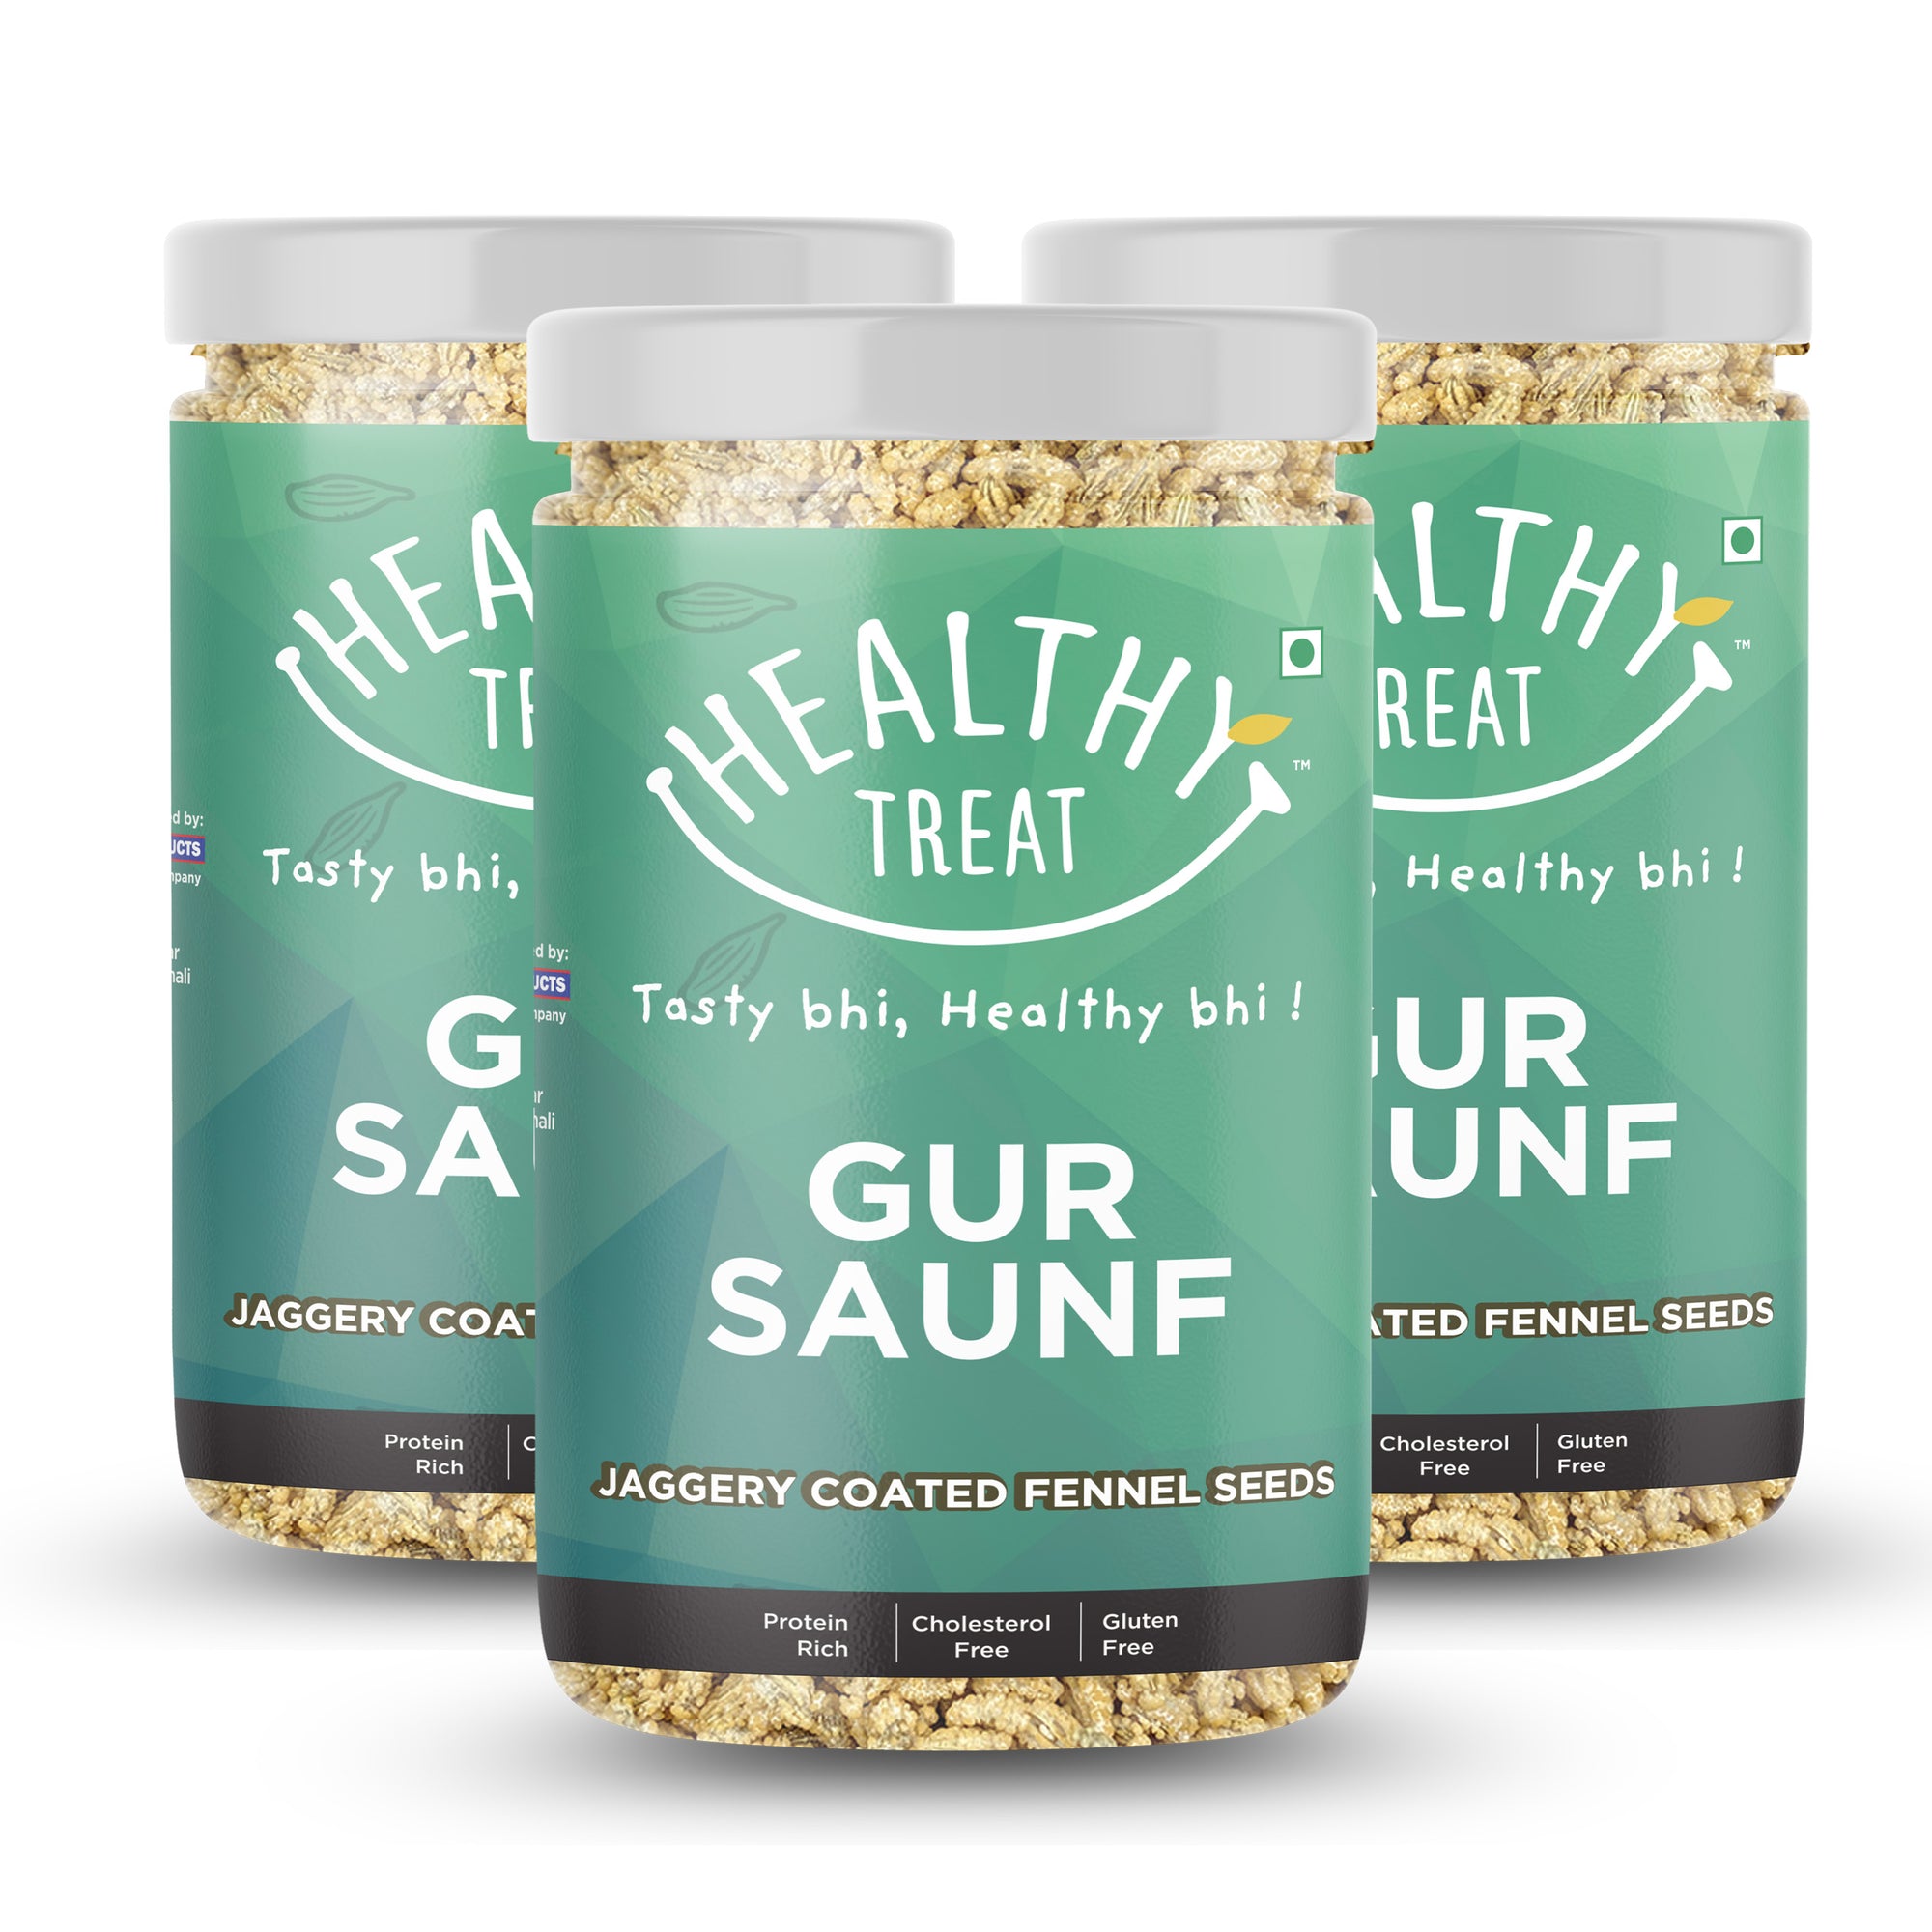 Healthy Treat Gur Saunf or Jaggery Fennels, a healthy mukhwas or mouth freshener, and an aftermeal digestive snack, for your sweet cravings